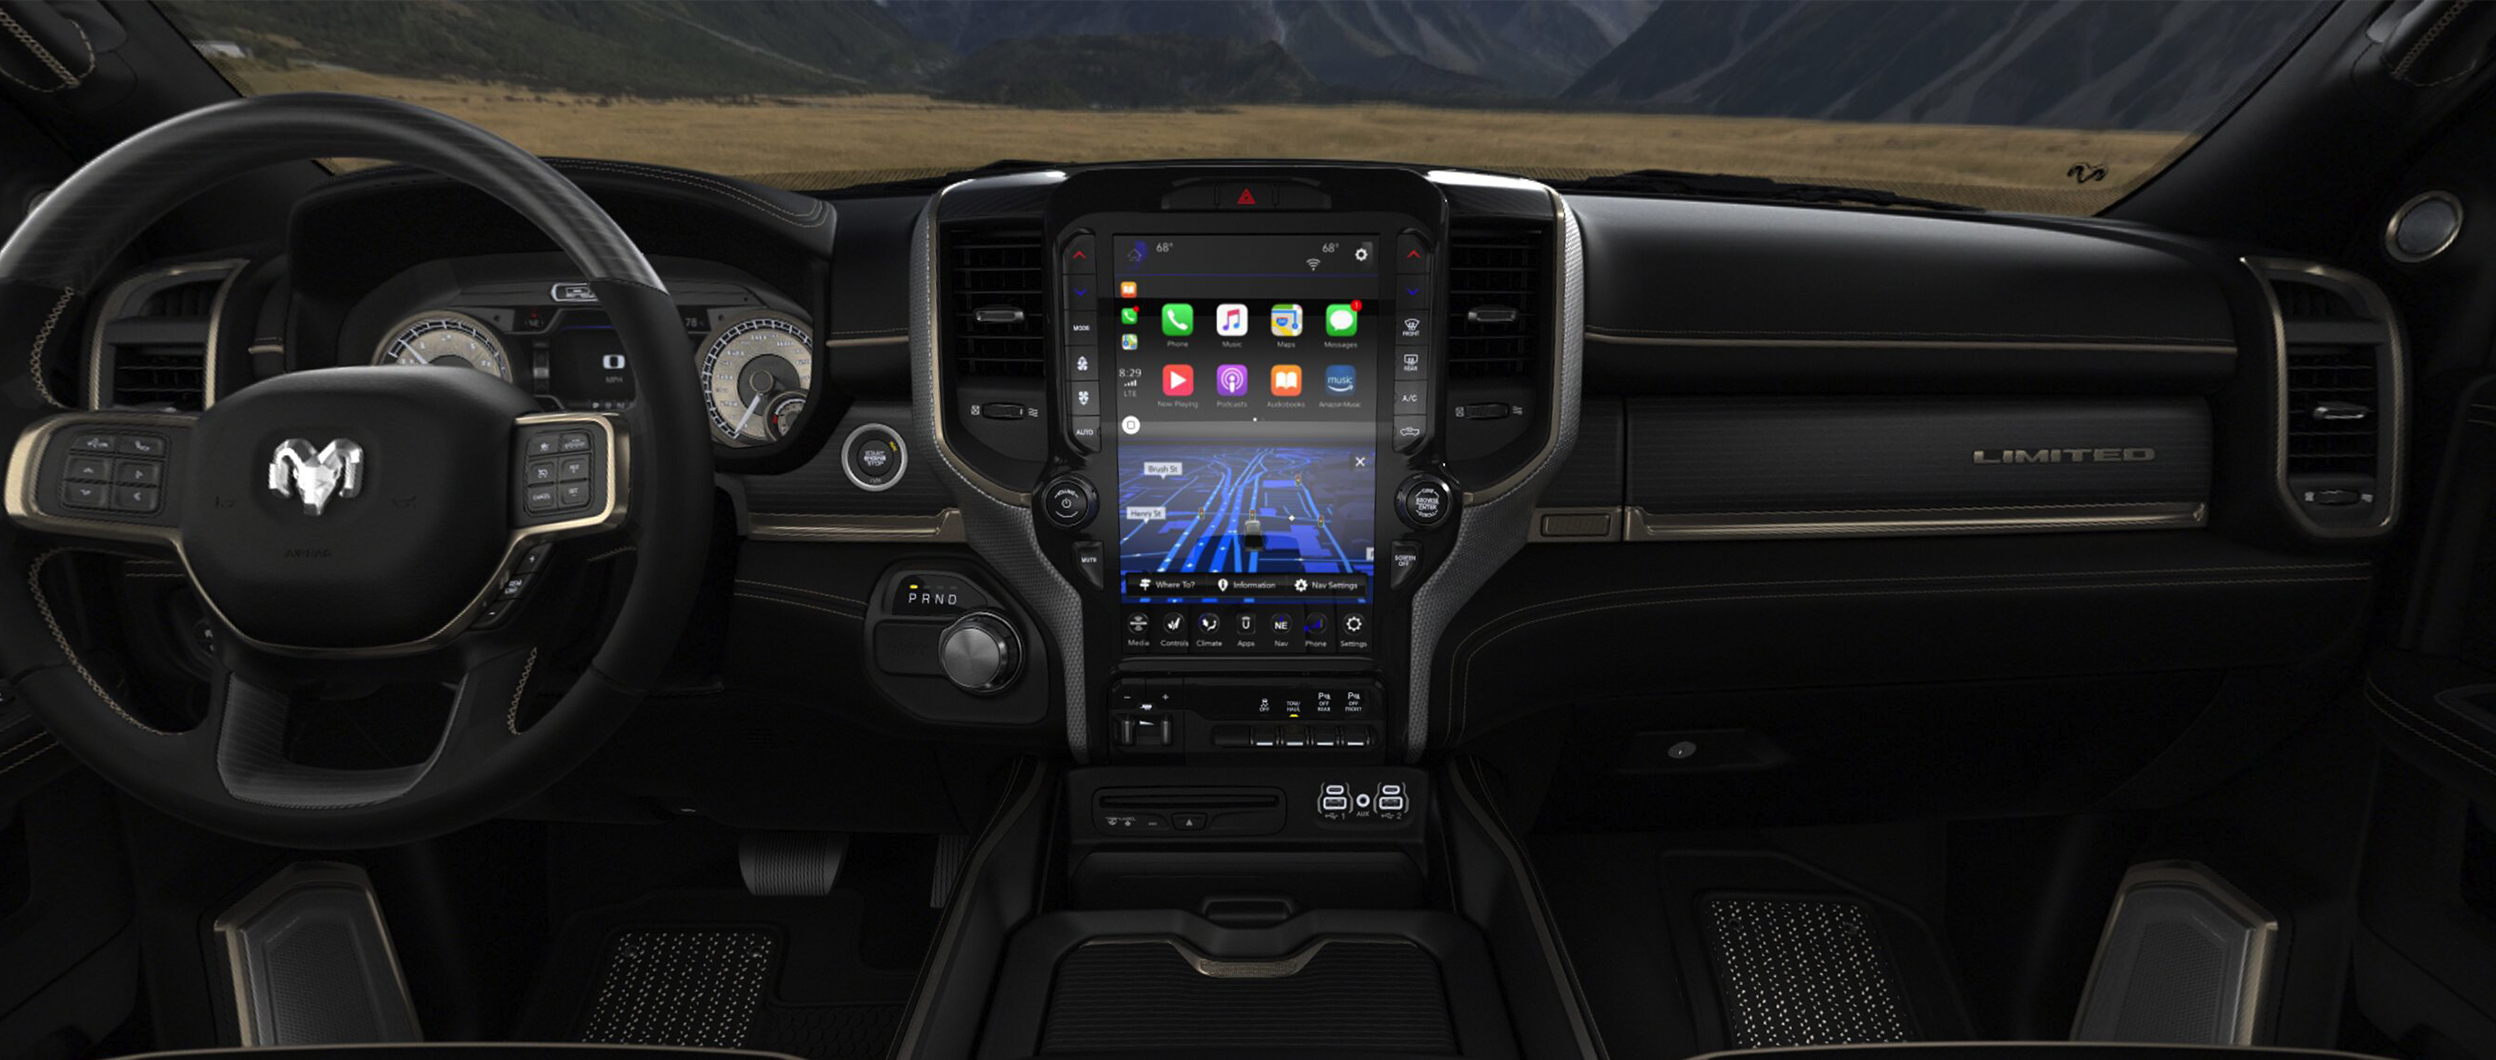 2020 Dodge Ram 3500 Limited Interior - Supercars Gallery